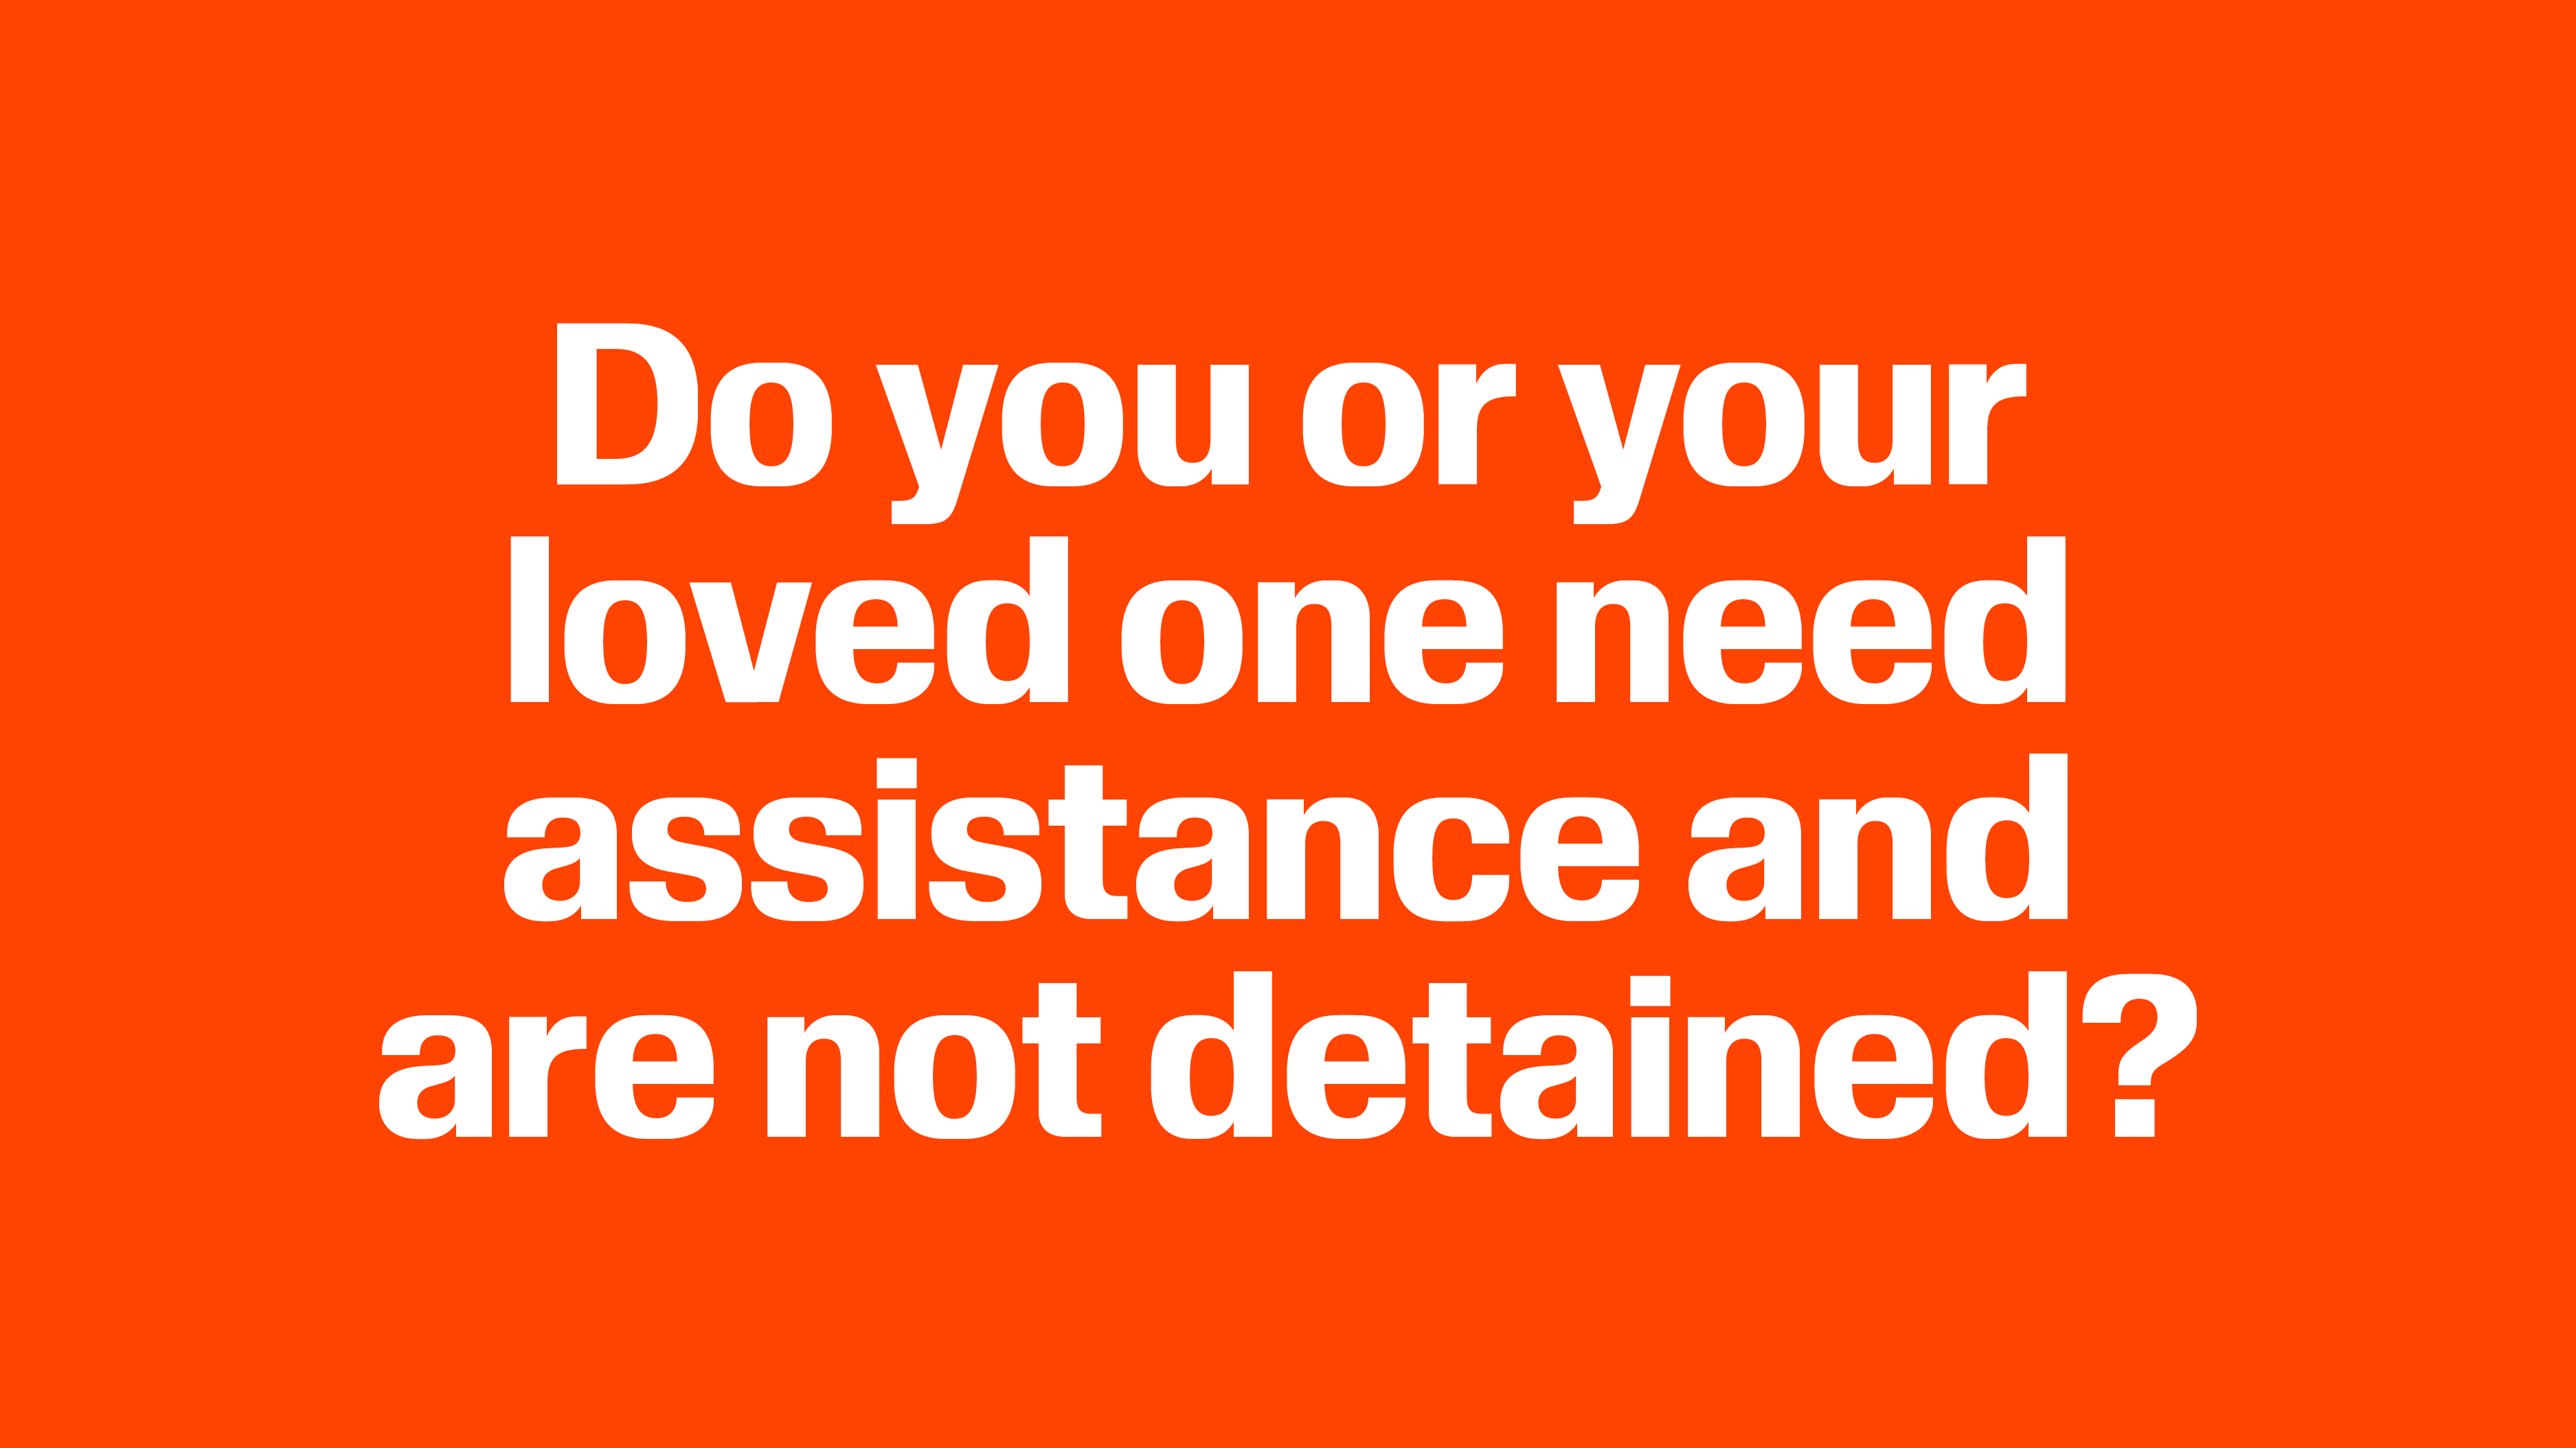 Do you or your loved one need assistance and are not detained?